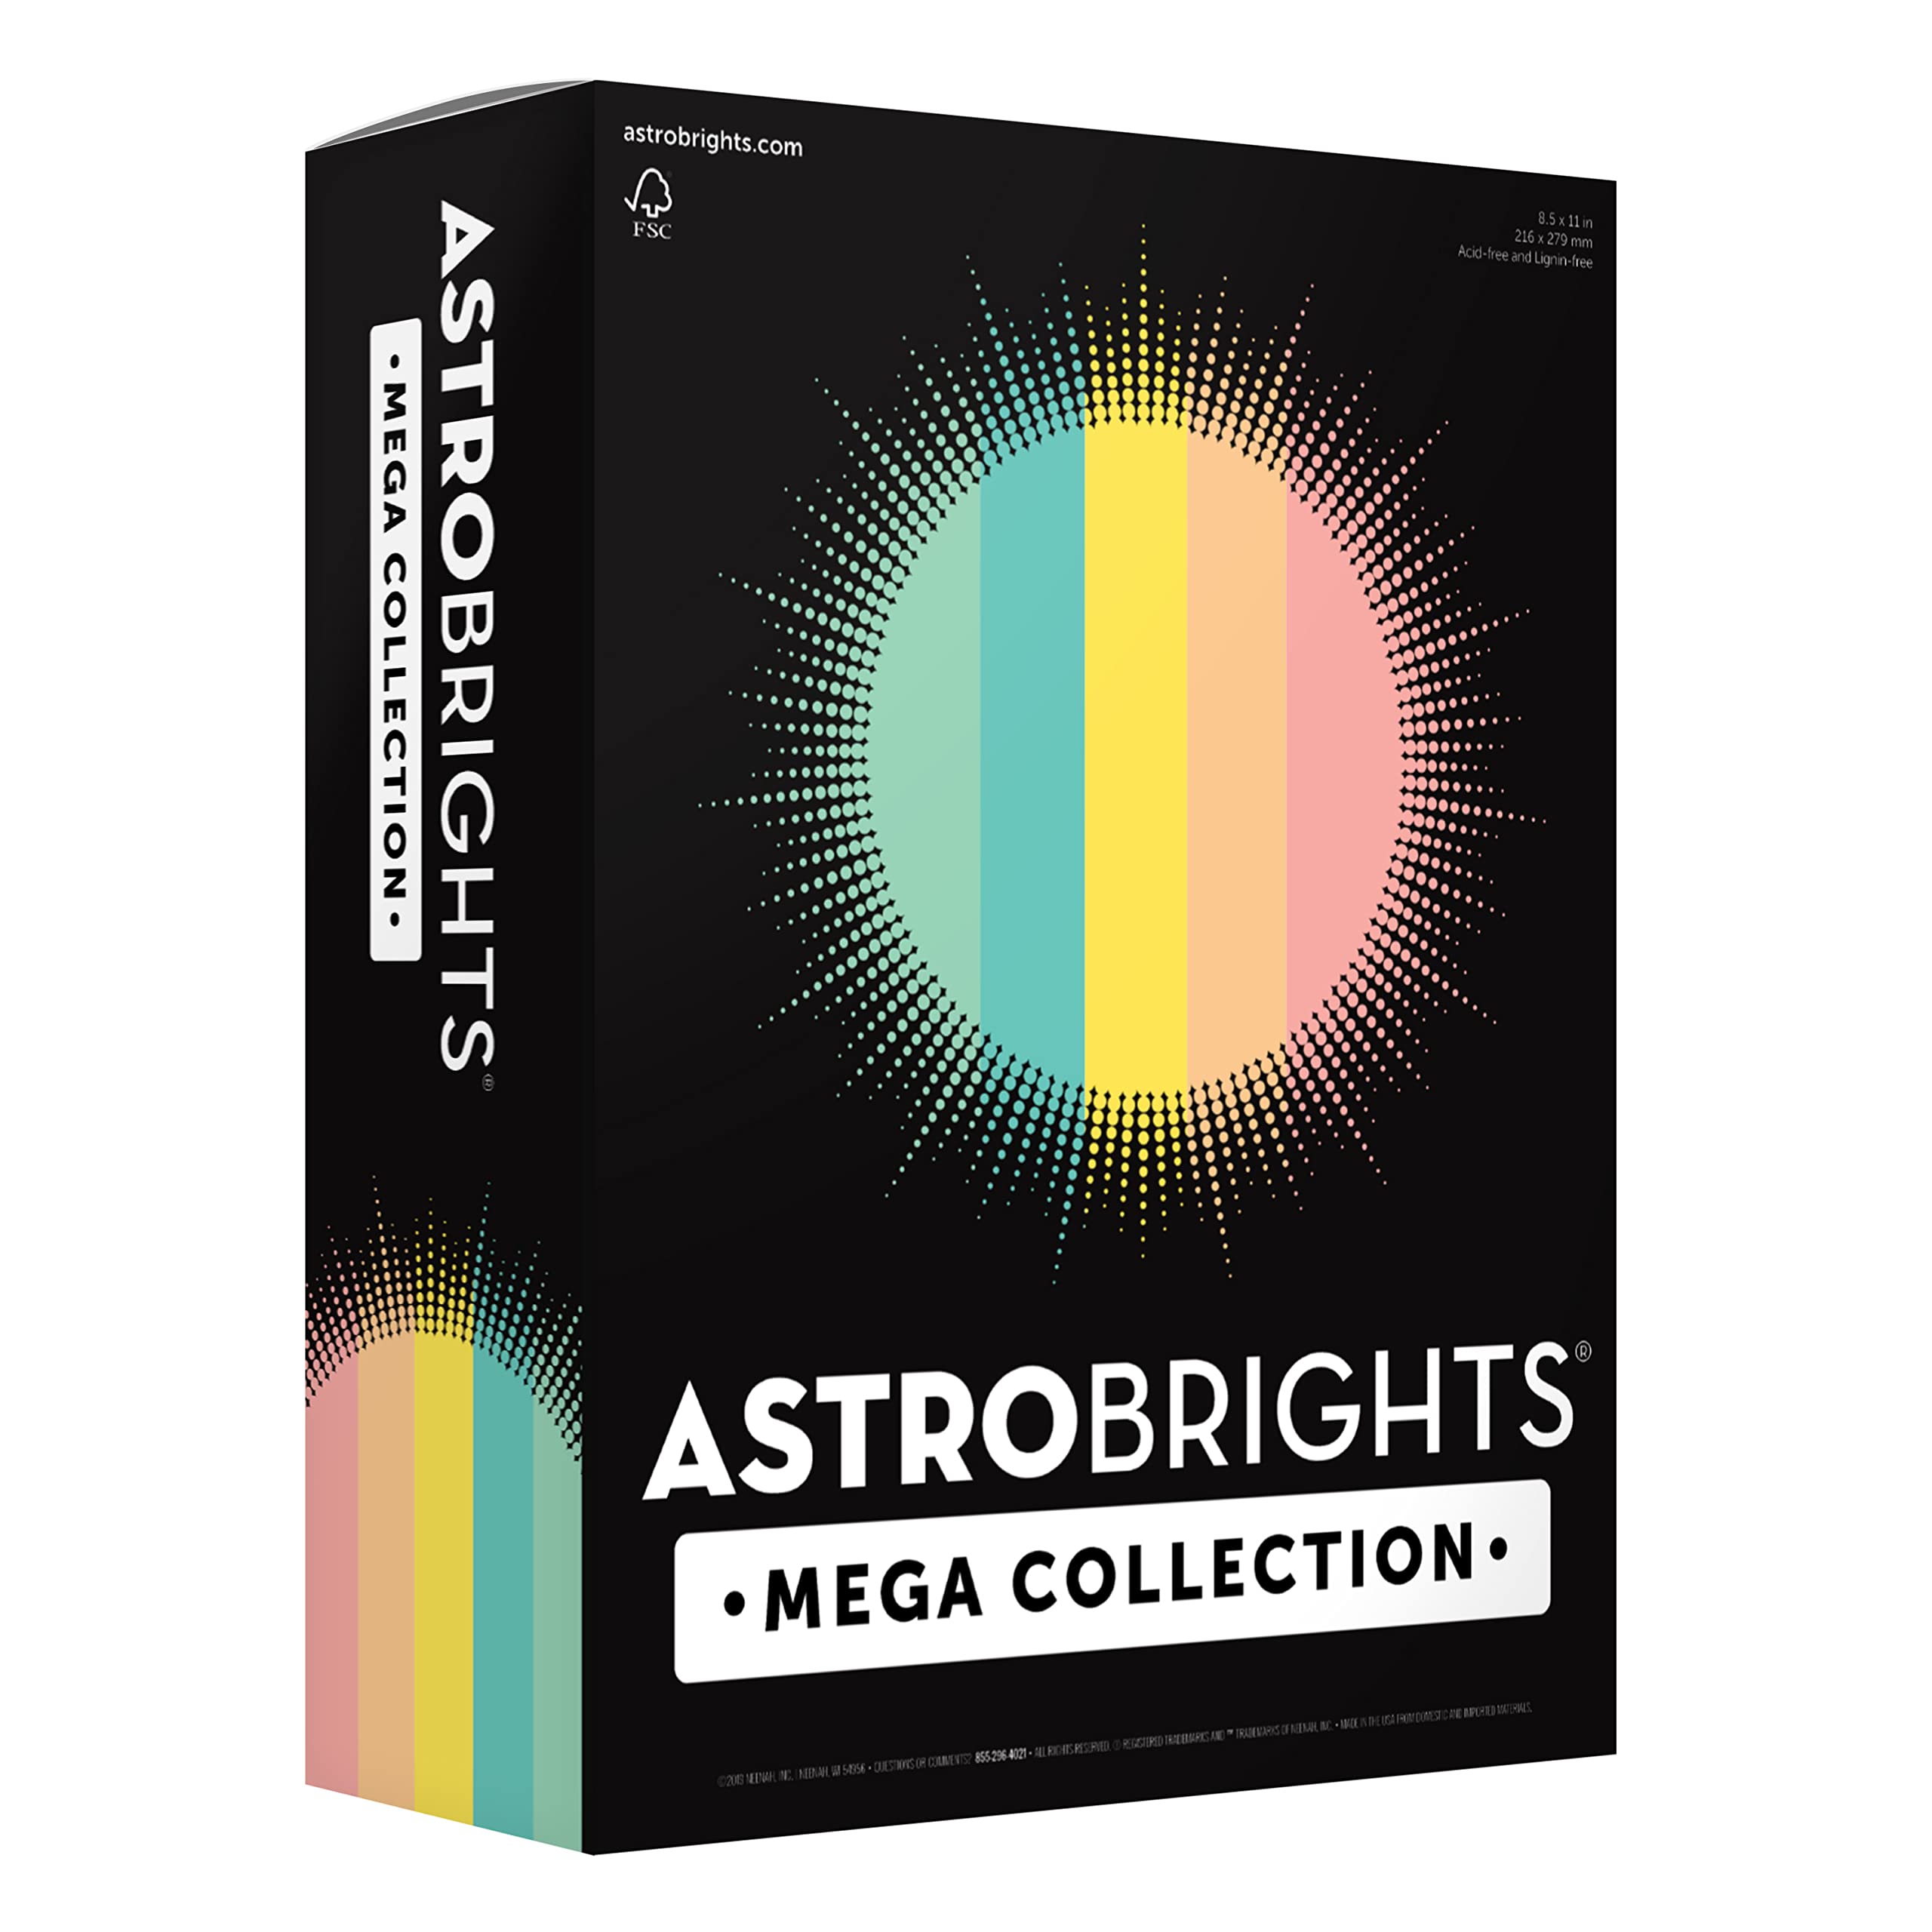 Paper weight chart -  Astrobright  cardstock is 65#